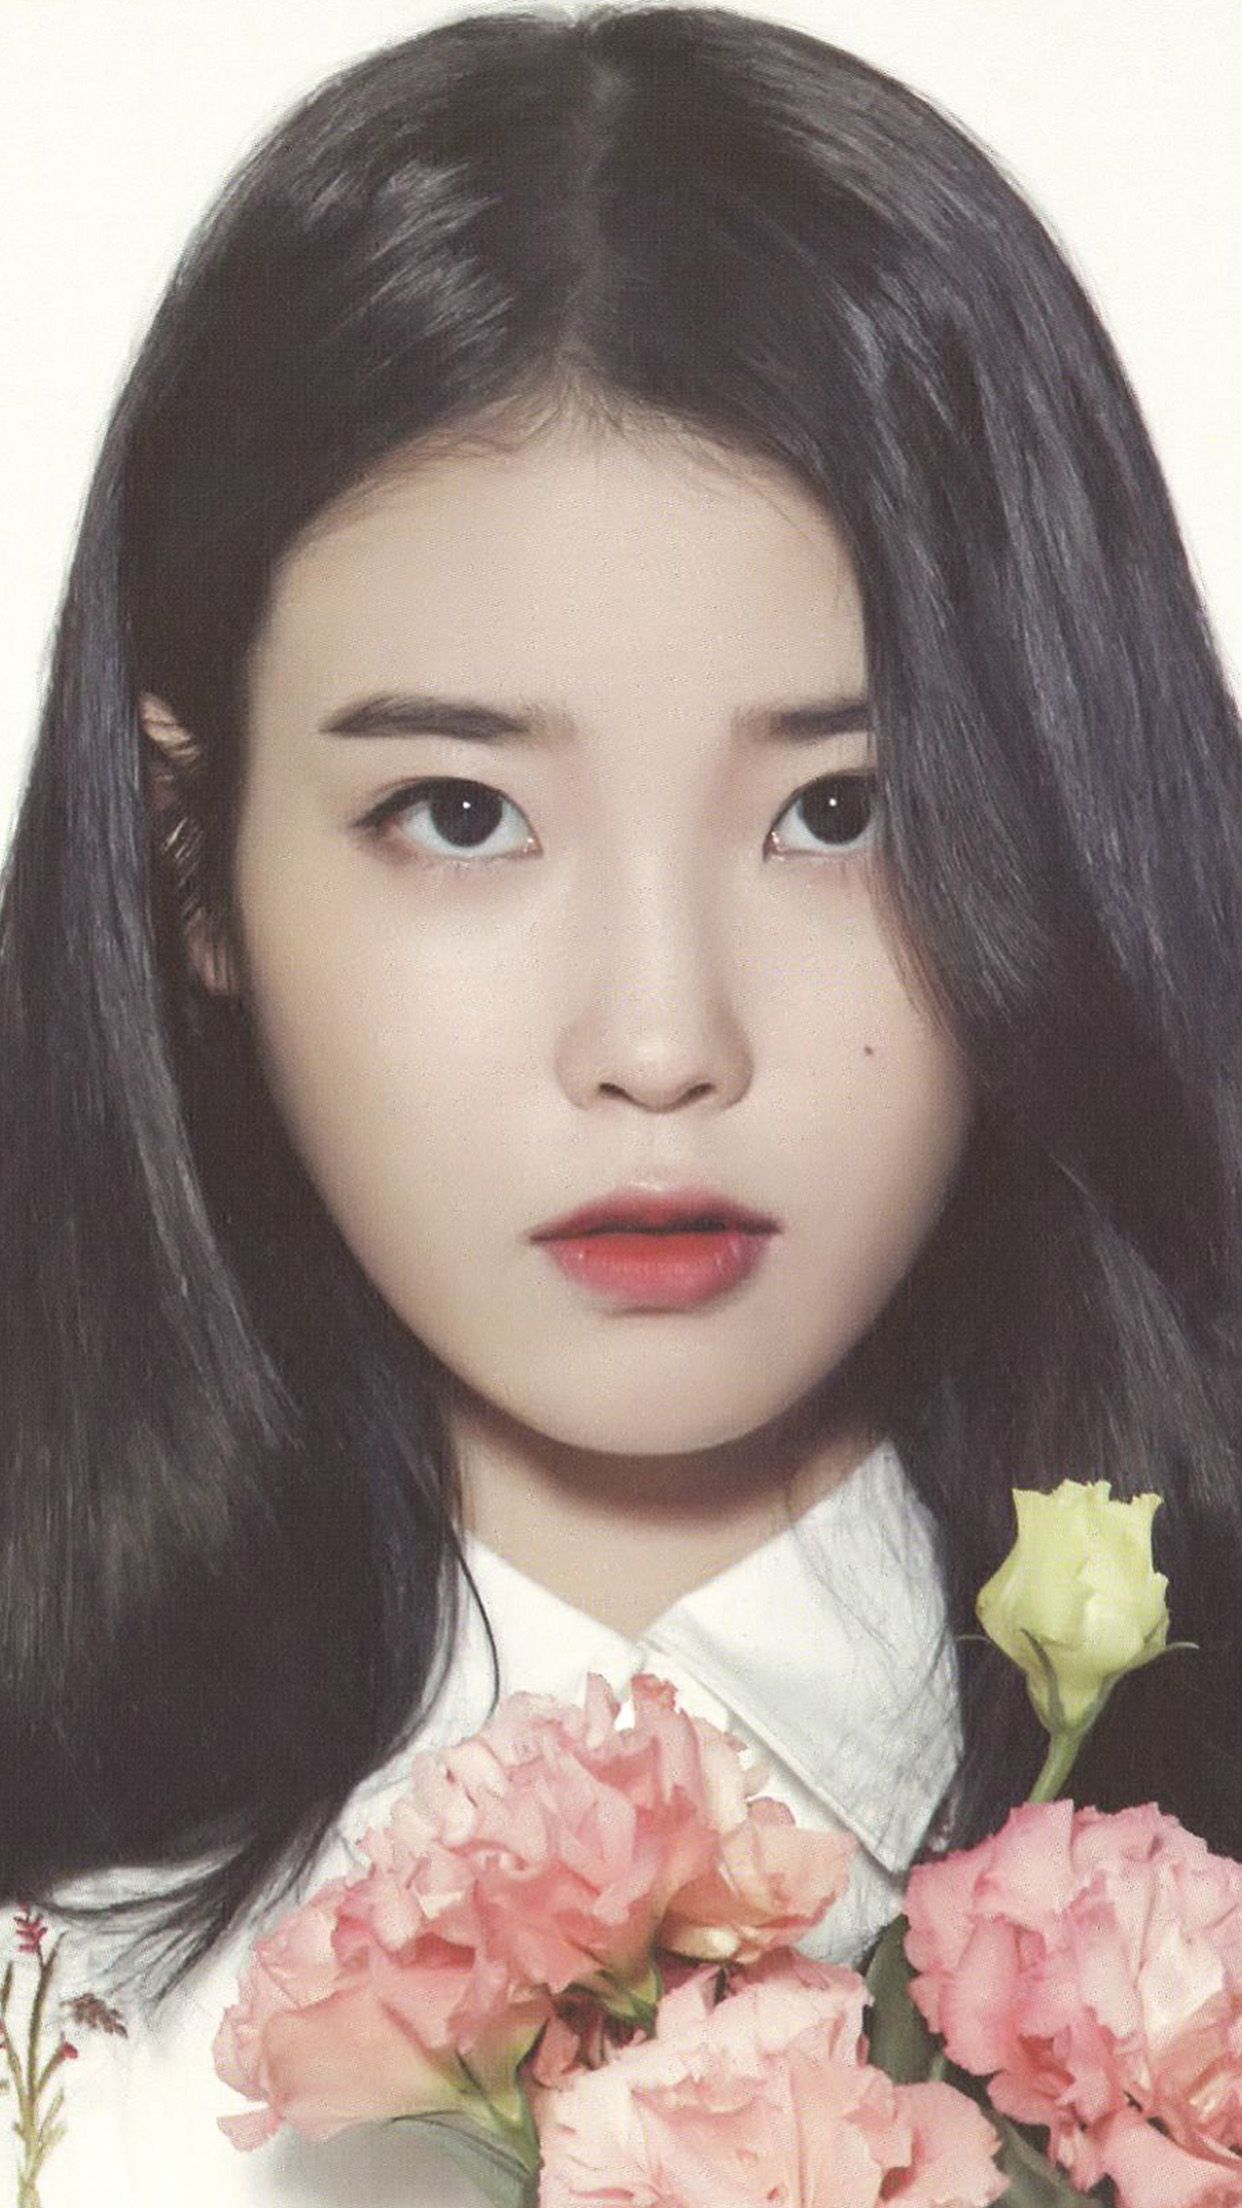 Iu Wallpaper / IU Wallpapers - Wallpaper Cave / Iu wallpapers 4k hd for ...